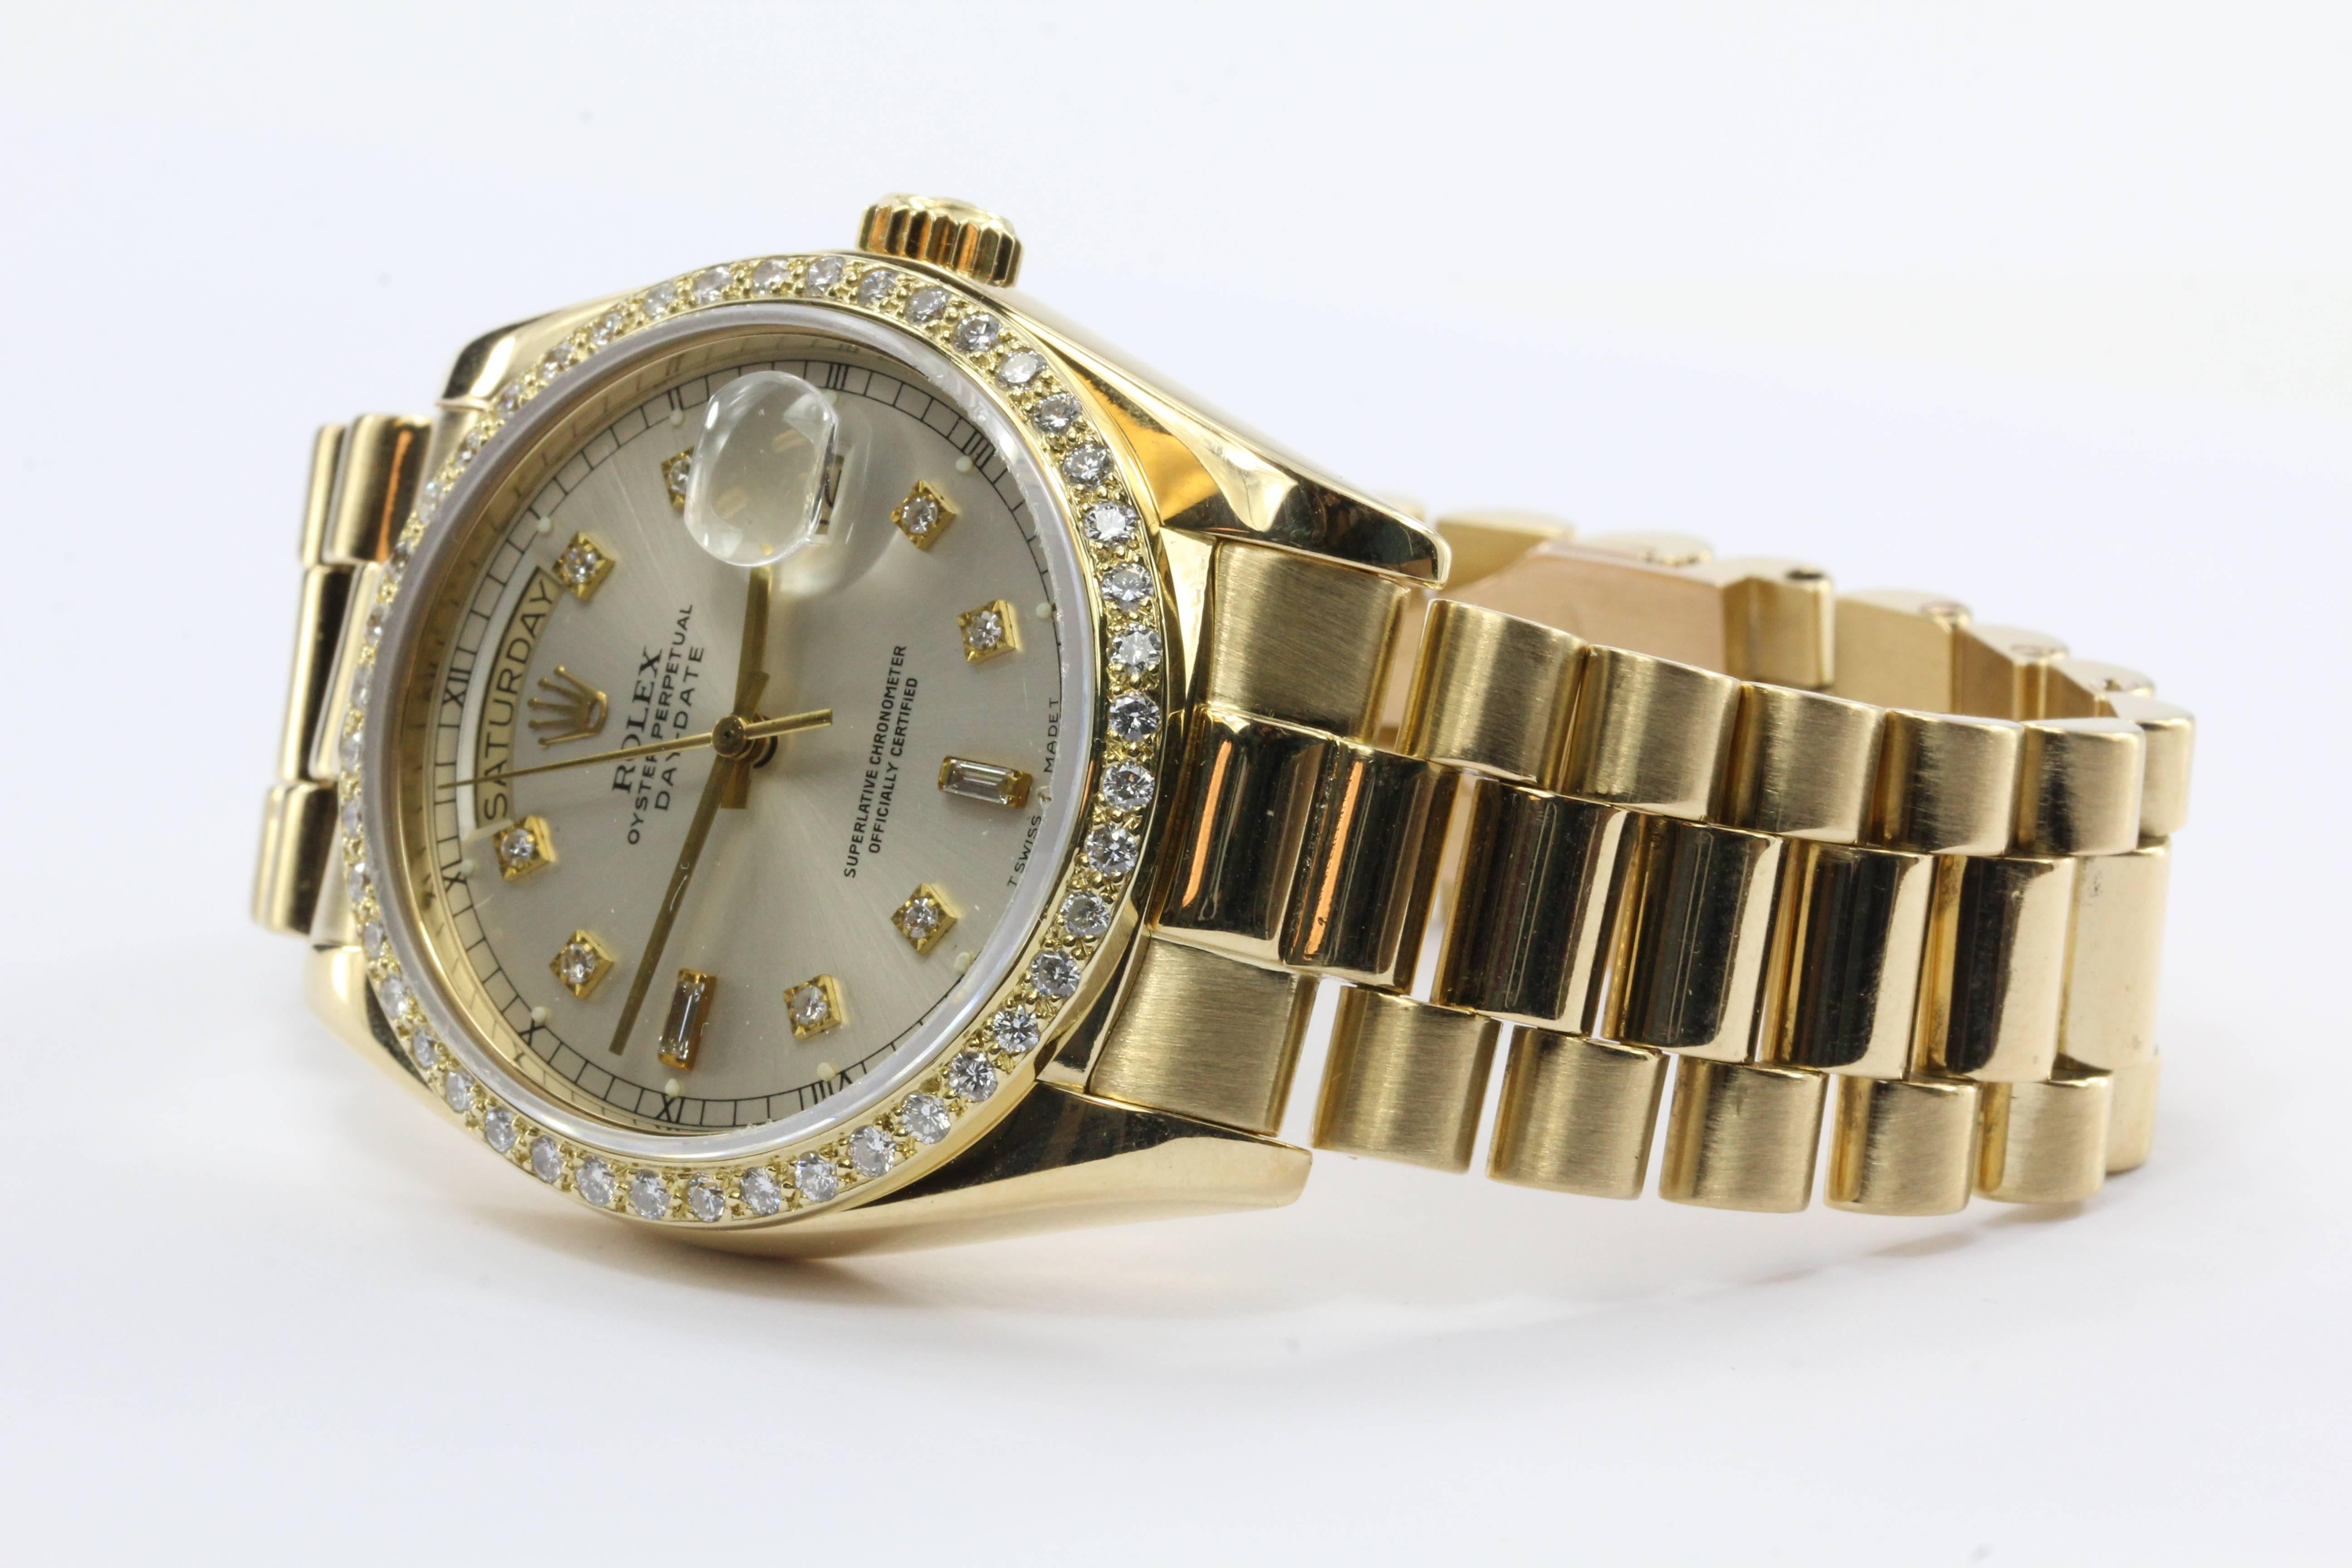 Rolex President Solid 18k Yellow Gold Original Diamonds Dial & Bezel. The watch is in excellent gently used estate condition and ready to wear. It was just serviced 11/18/16. The watch comes with its original box. 

Rolex President 18038 Featuring